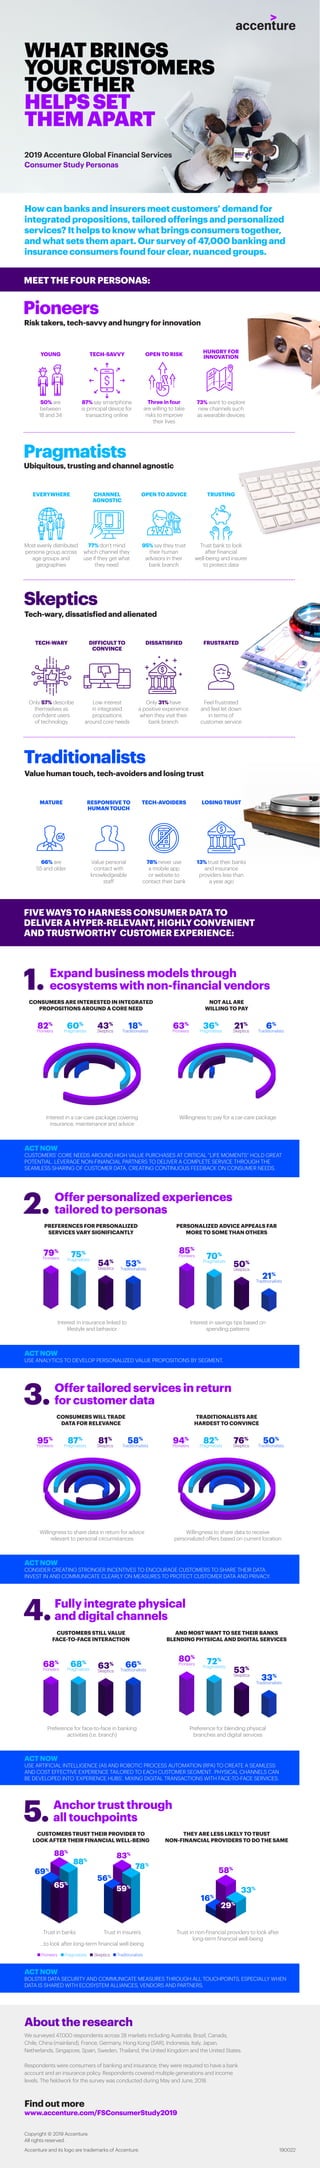 2019 Accenture Global Financial Services Consumer Study: Persona Infographic Slide 1